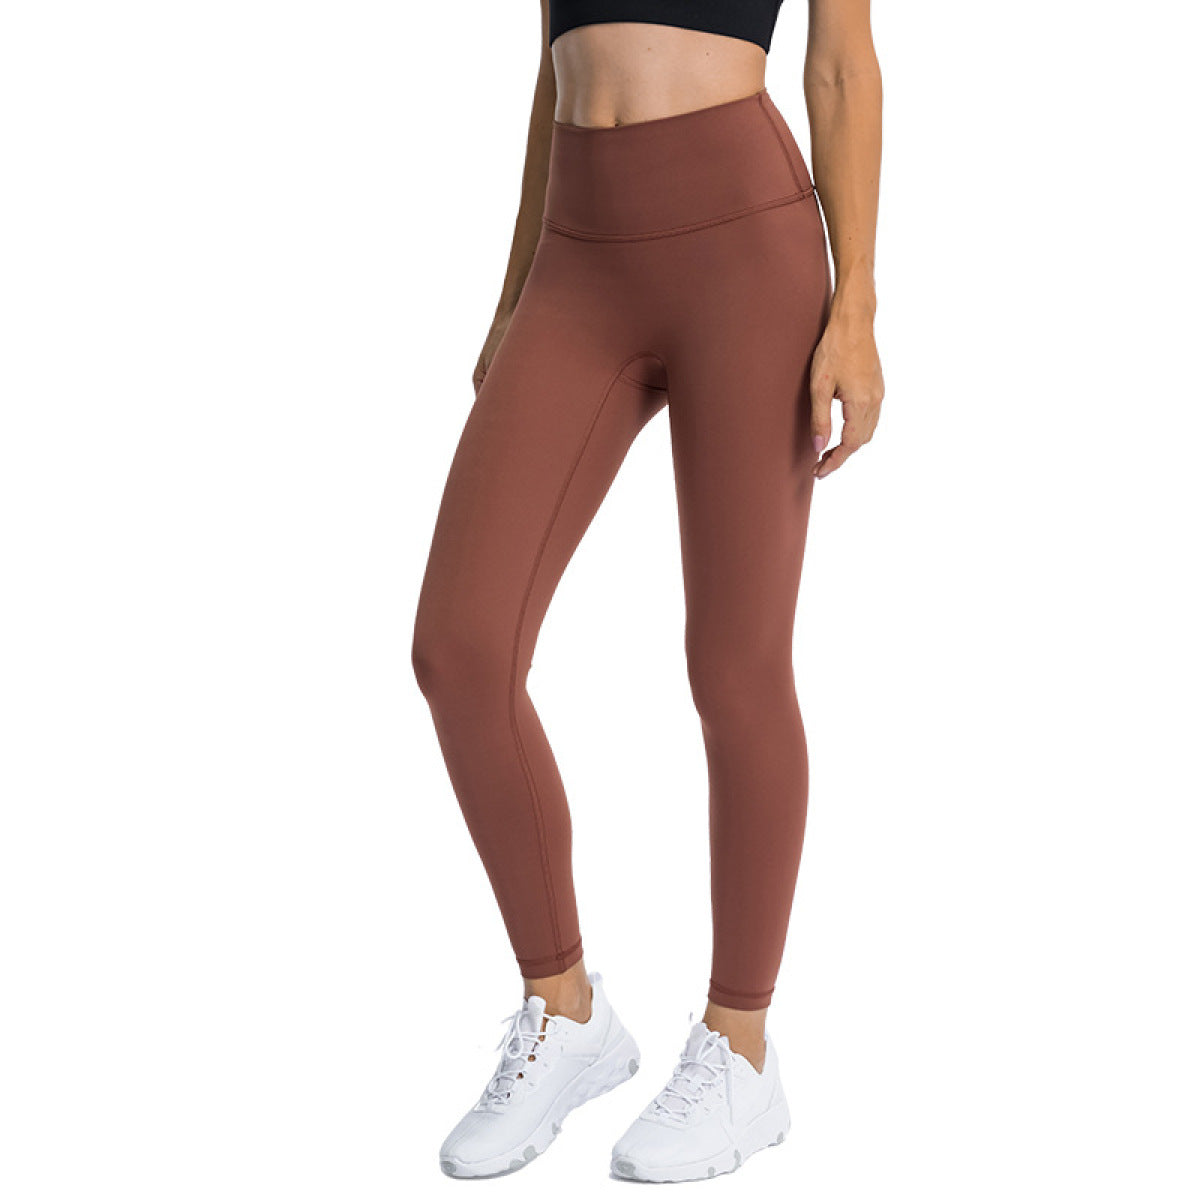 Women's High Waist  Yoga Pants with Invisible Pocket